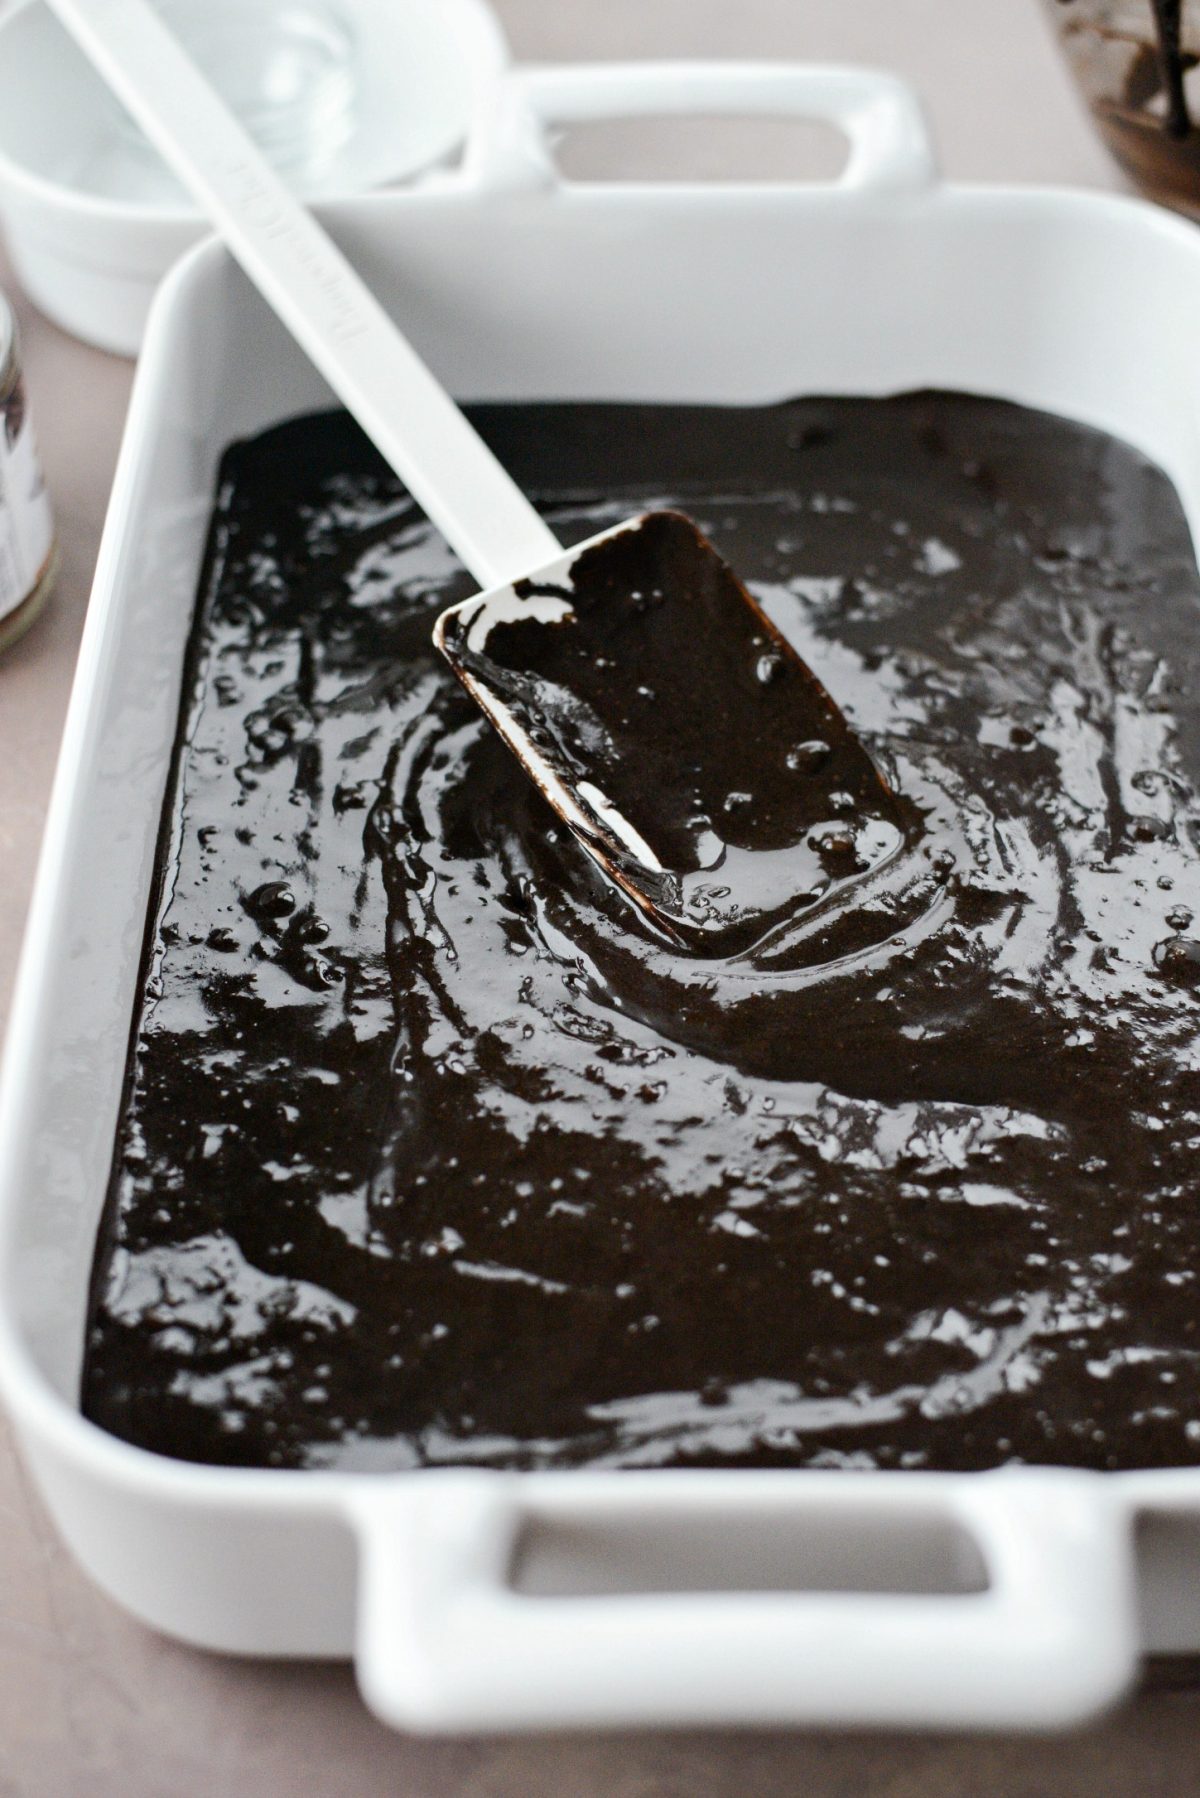 Pour the chocolate cake batter into un-greased pan.